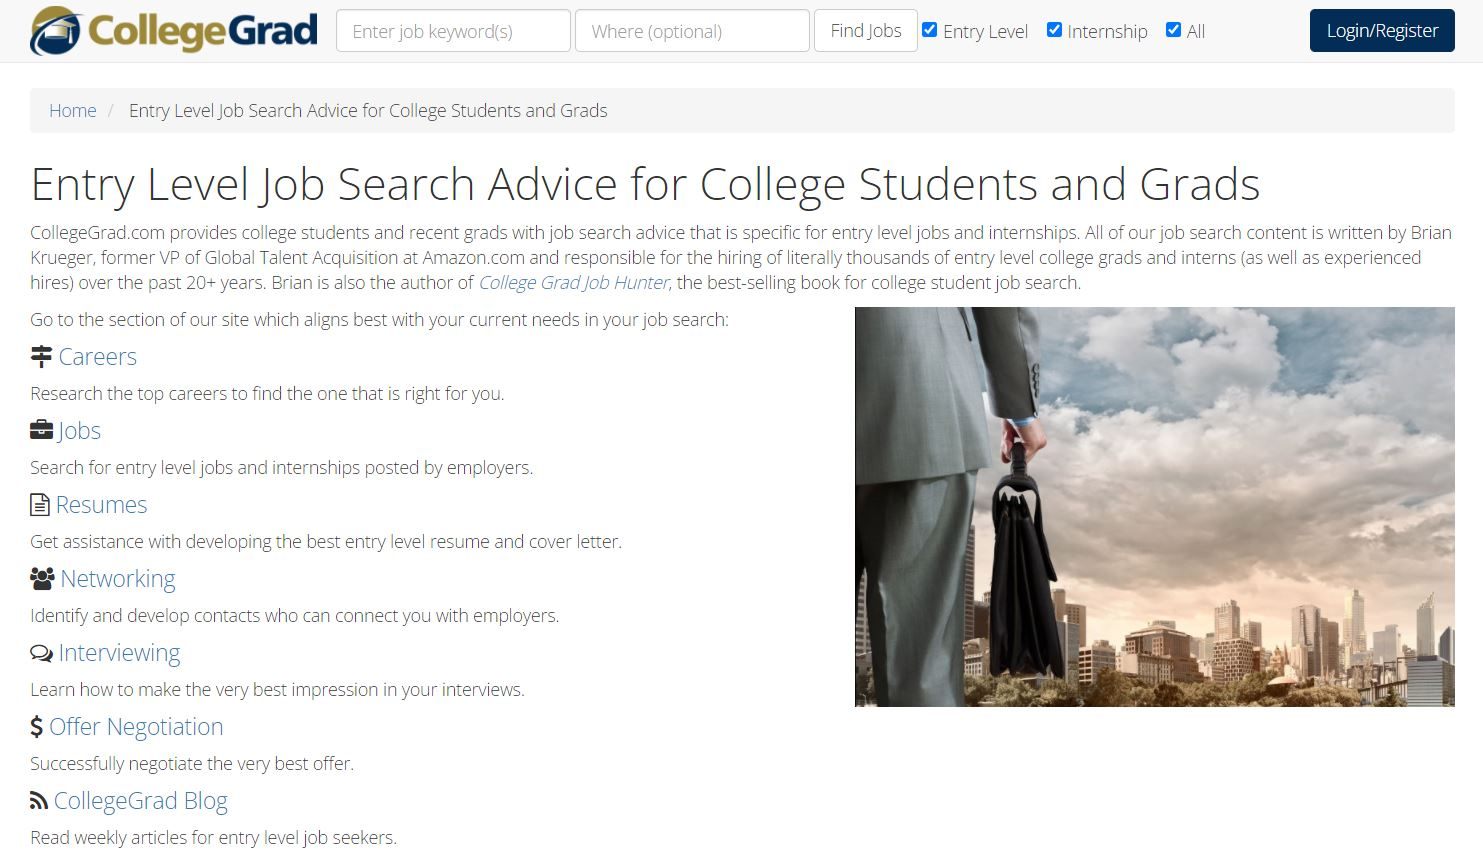 College Grad - Search for Jobs with this Platform